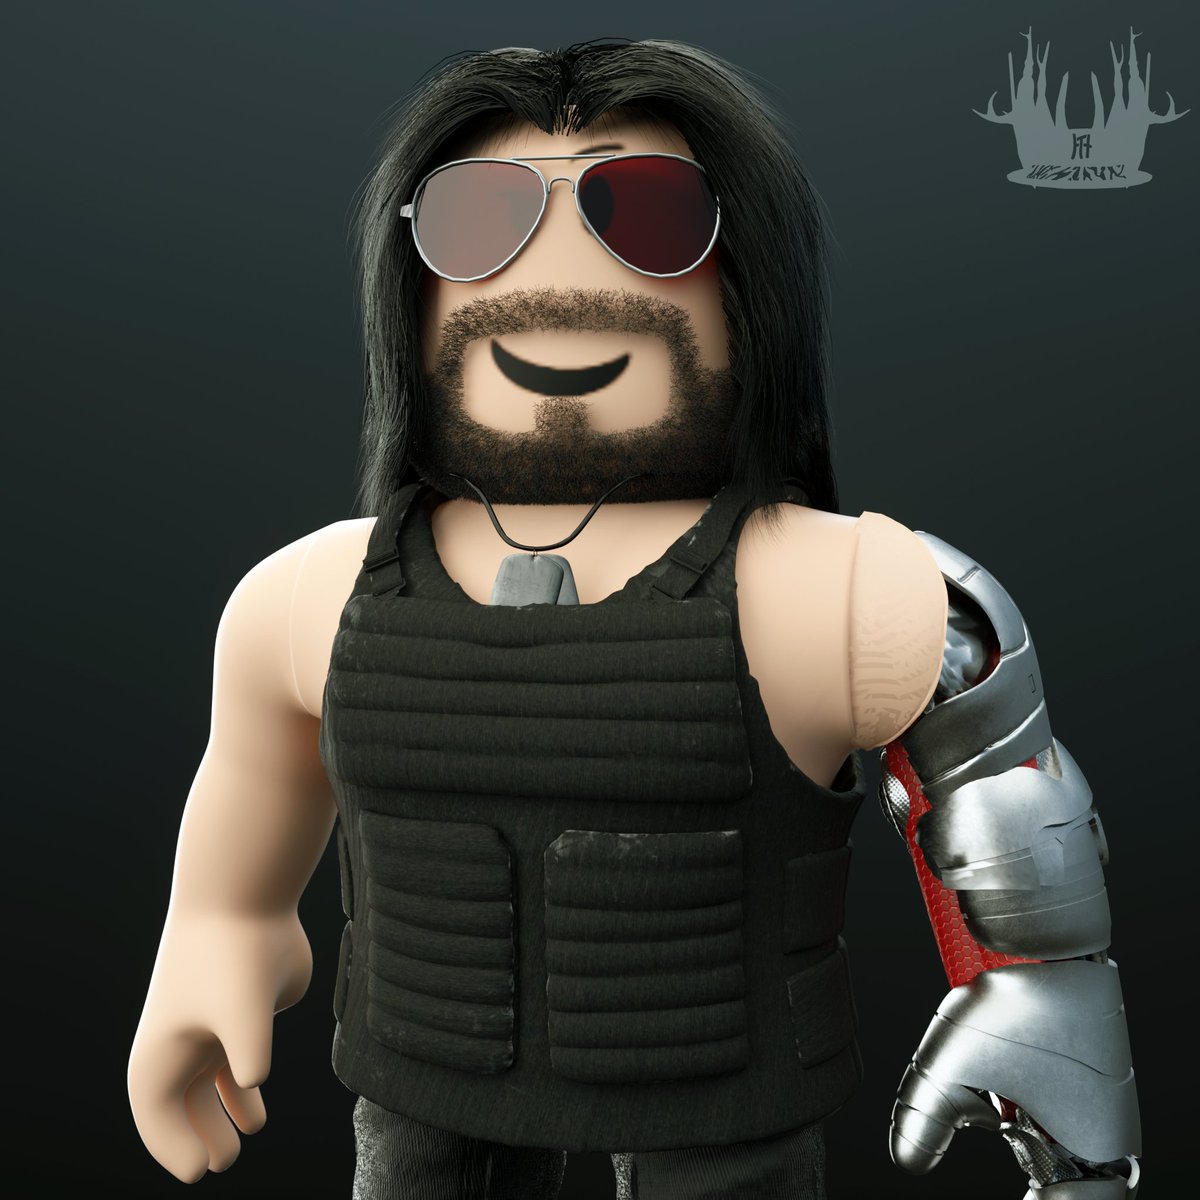 Hywwit On Twitter Render Of Johnny Silverhand From Cyberpunk2077 Likes And Rts Appreciated Roblox Robloxdev Robloxgfxc Robloxgfx Robloxart Https T Co Wijunlbi15 - johnny games roblox